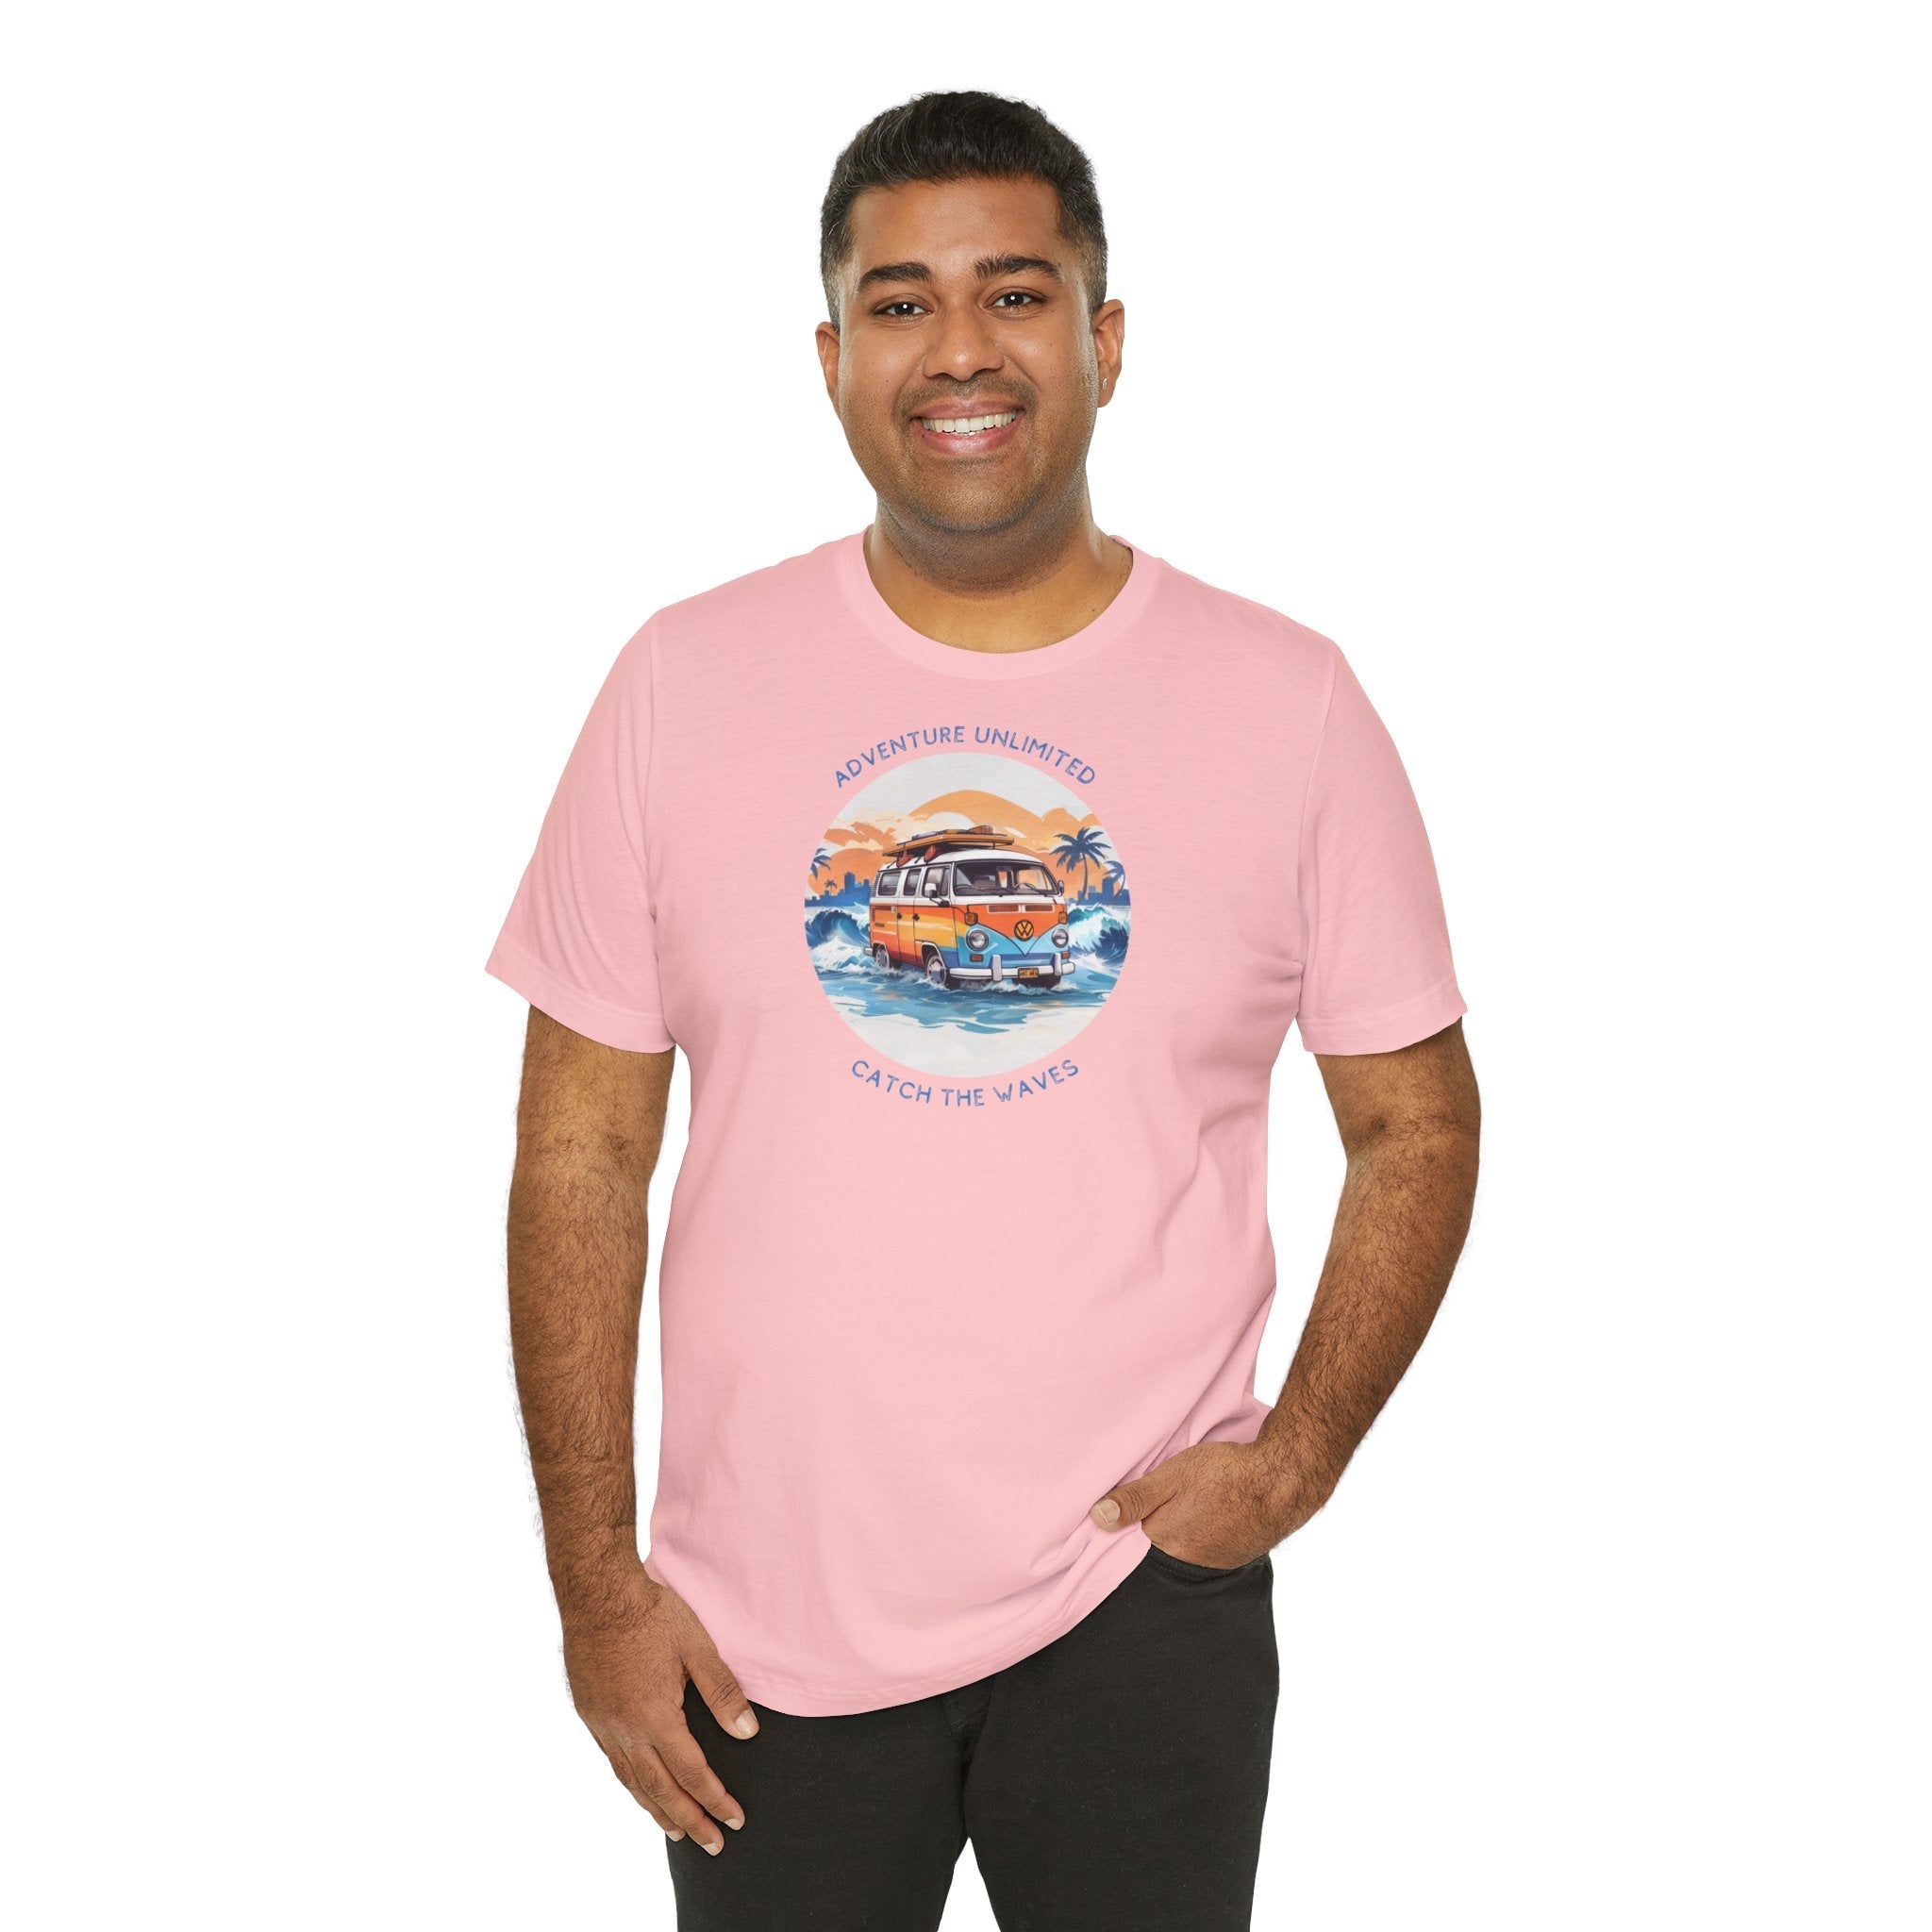 Adventure Unlimited surfing t-shirt with man wearing pink t-shirt and surfboard design, printed direct-to-garment